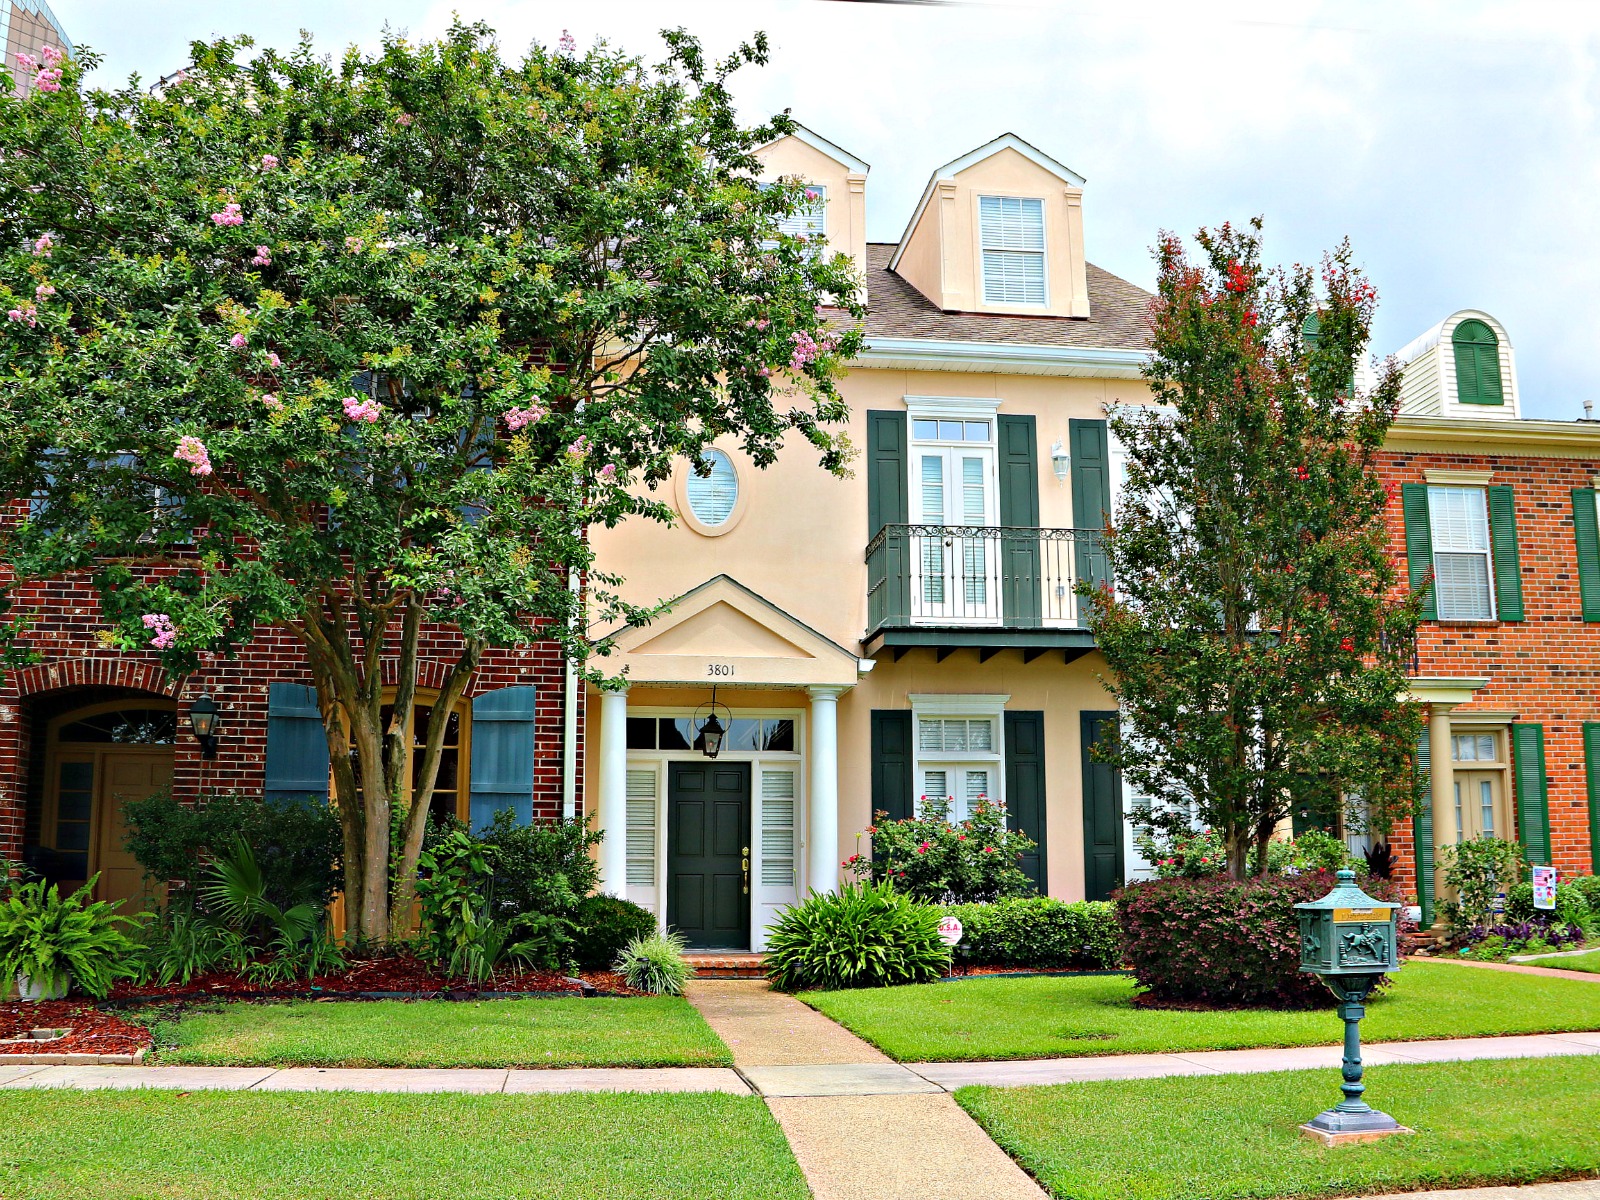 North Hullen Townhomes in Metairie,La. 70002 - Old Metairie Real Estate, Homes & Condos